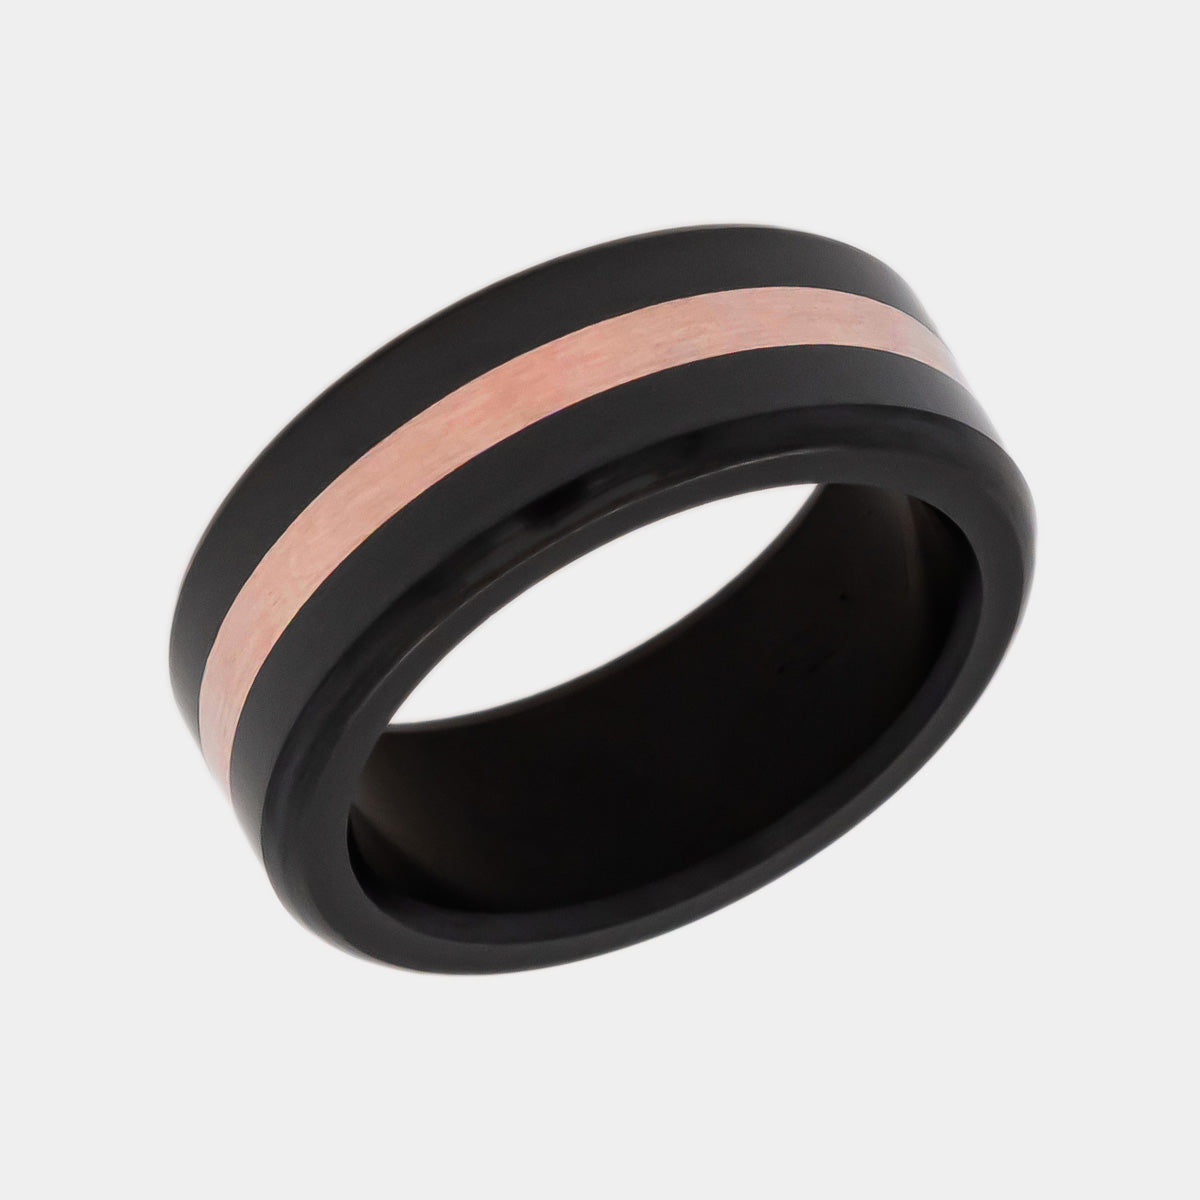 Kratos - 8mm - Size 11.5 - Matte Finish 10k Rose Gold Inlay - SHIPS WITHIN 2 BUSINESS DAYS